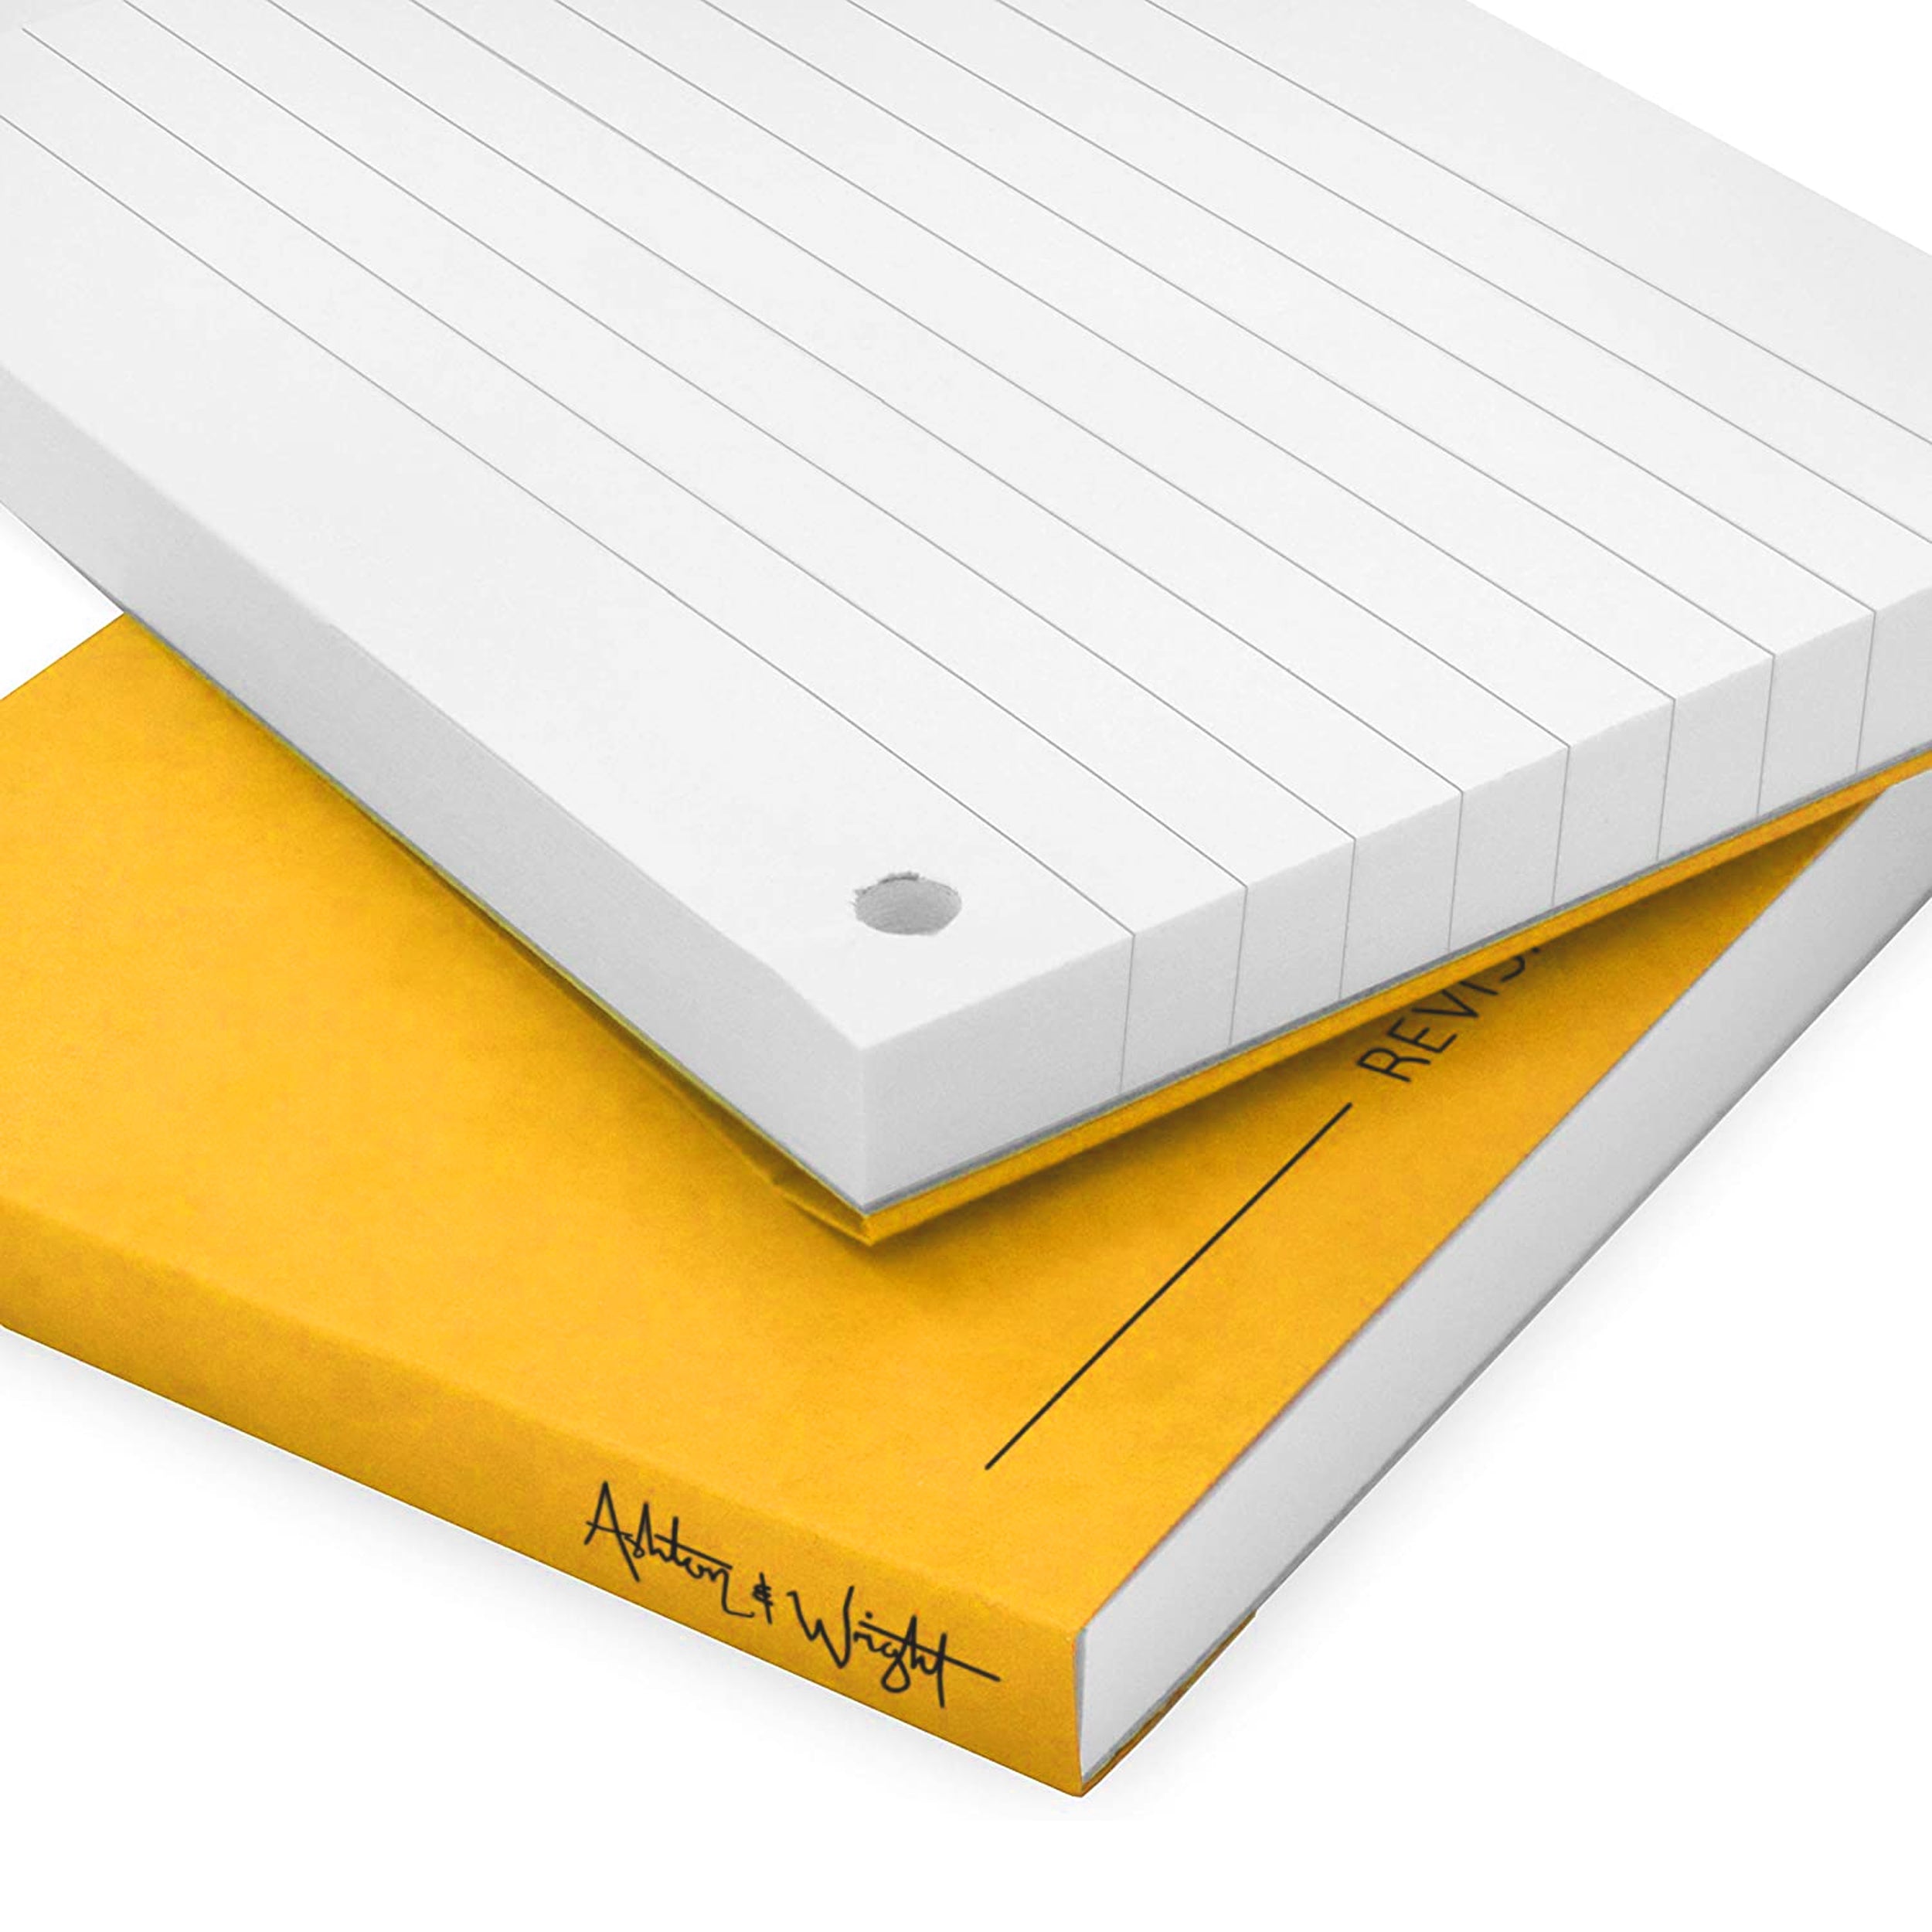 Revision Cards Book - Yellow Mottled Cover